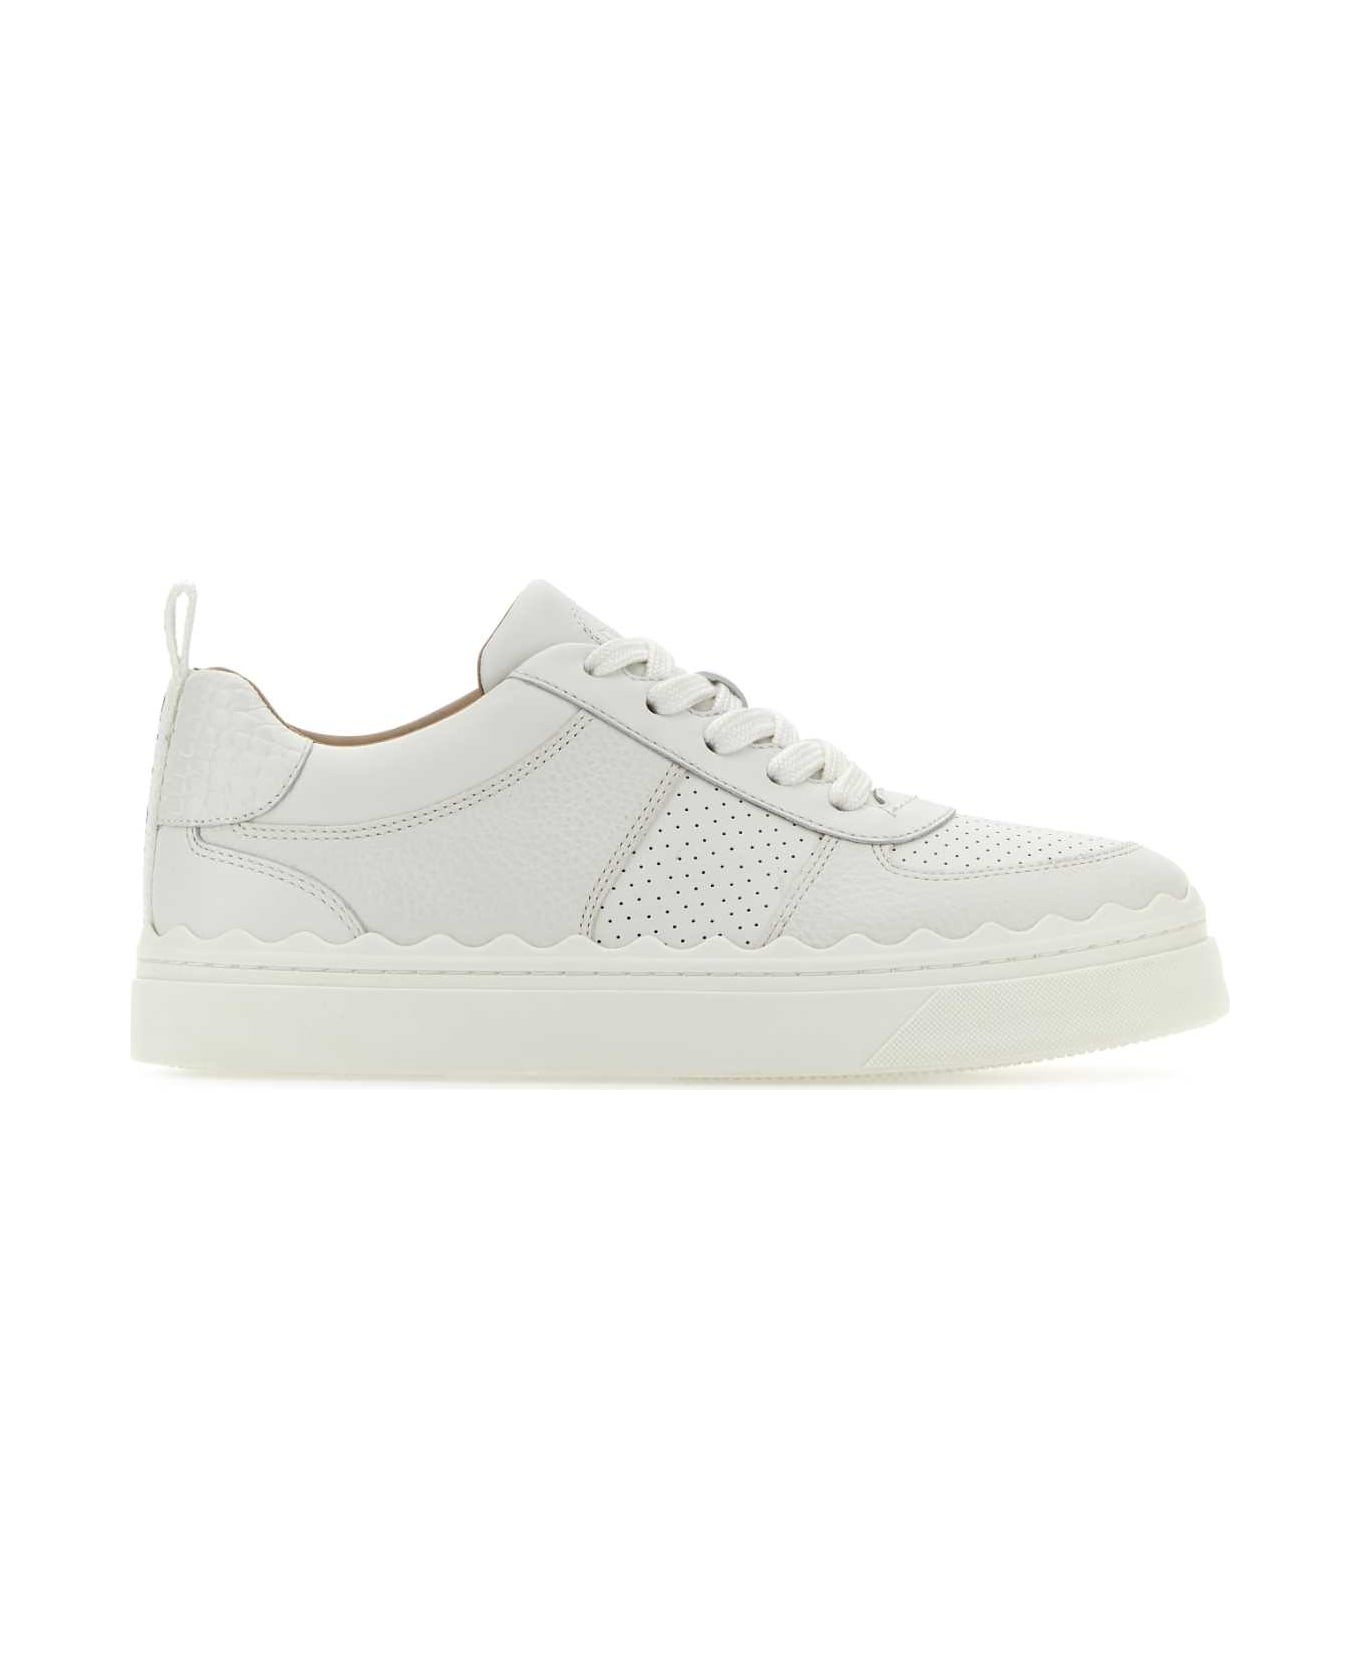 Chloé White Leather Sneakers - WHITE